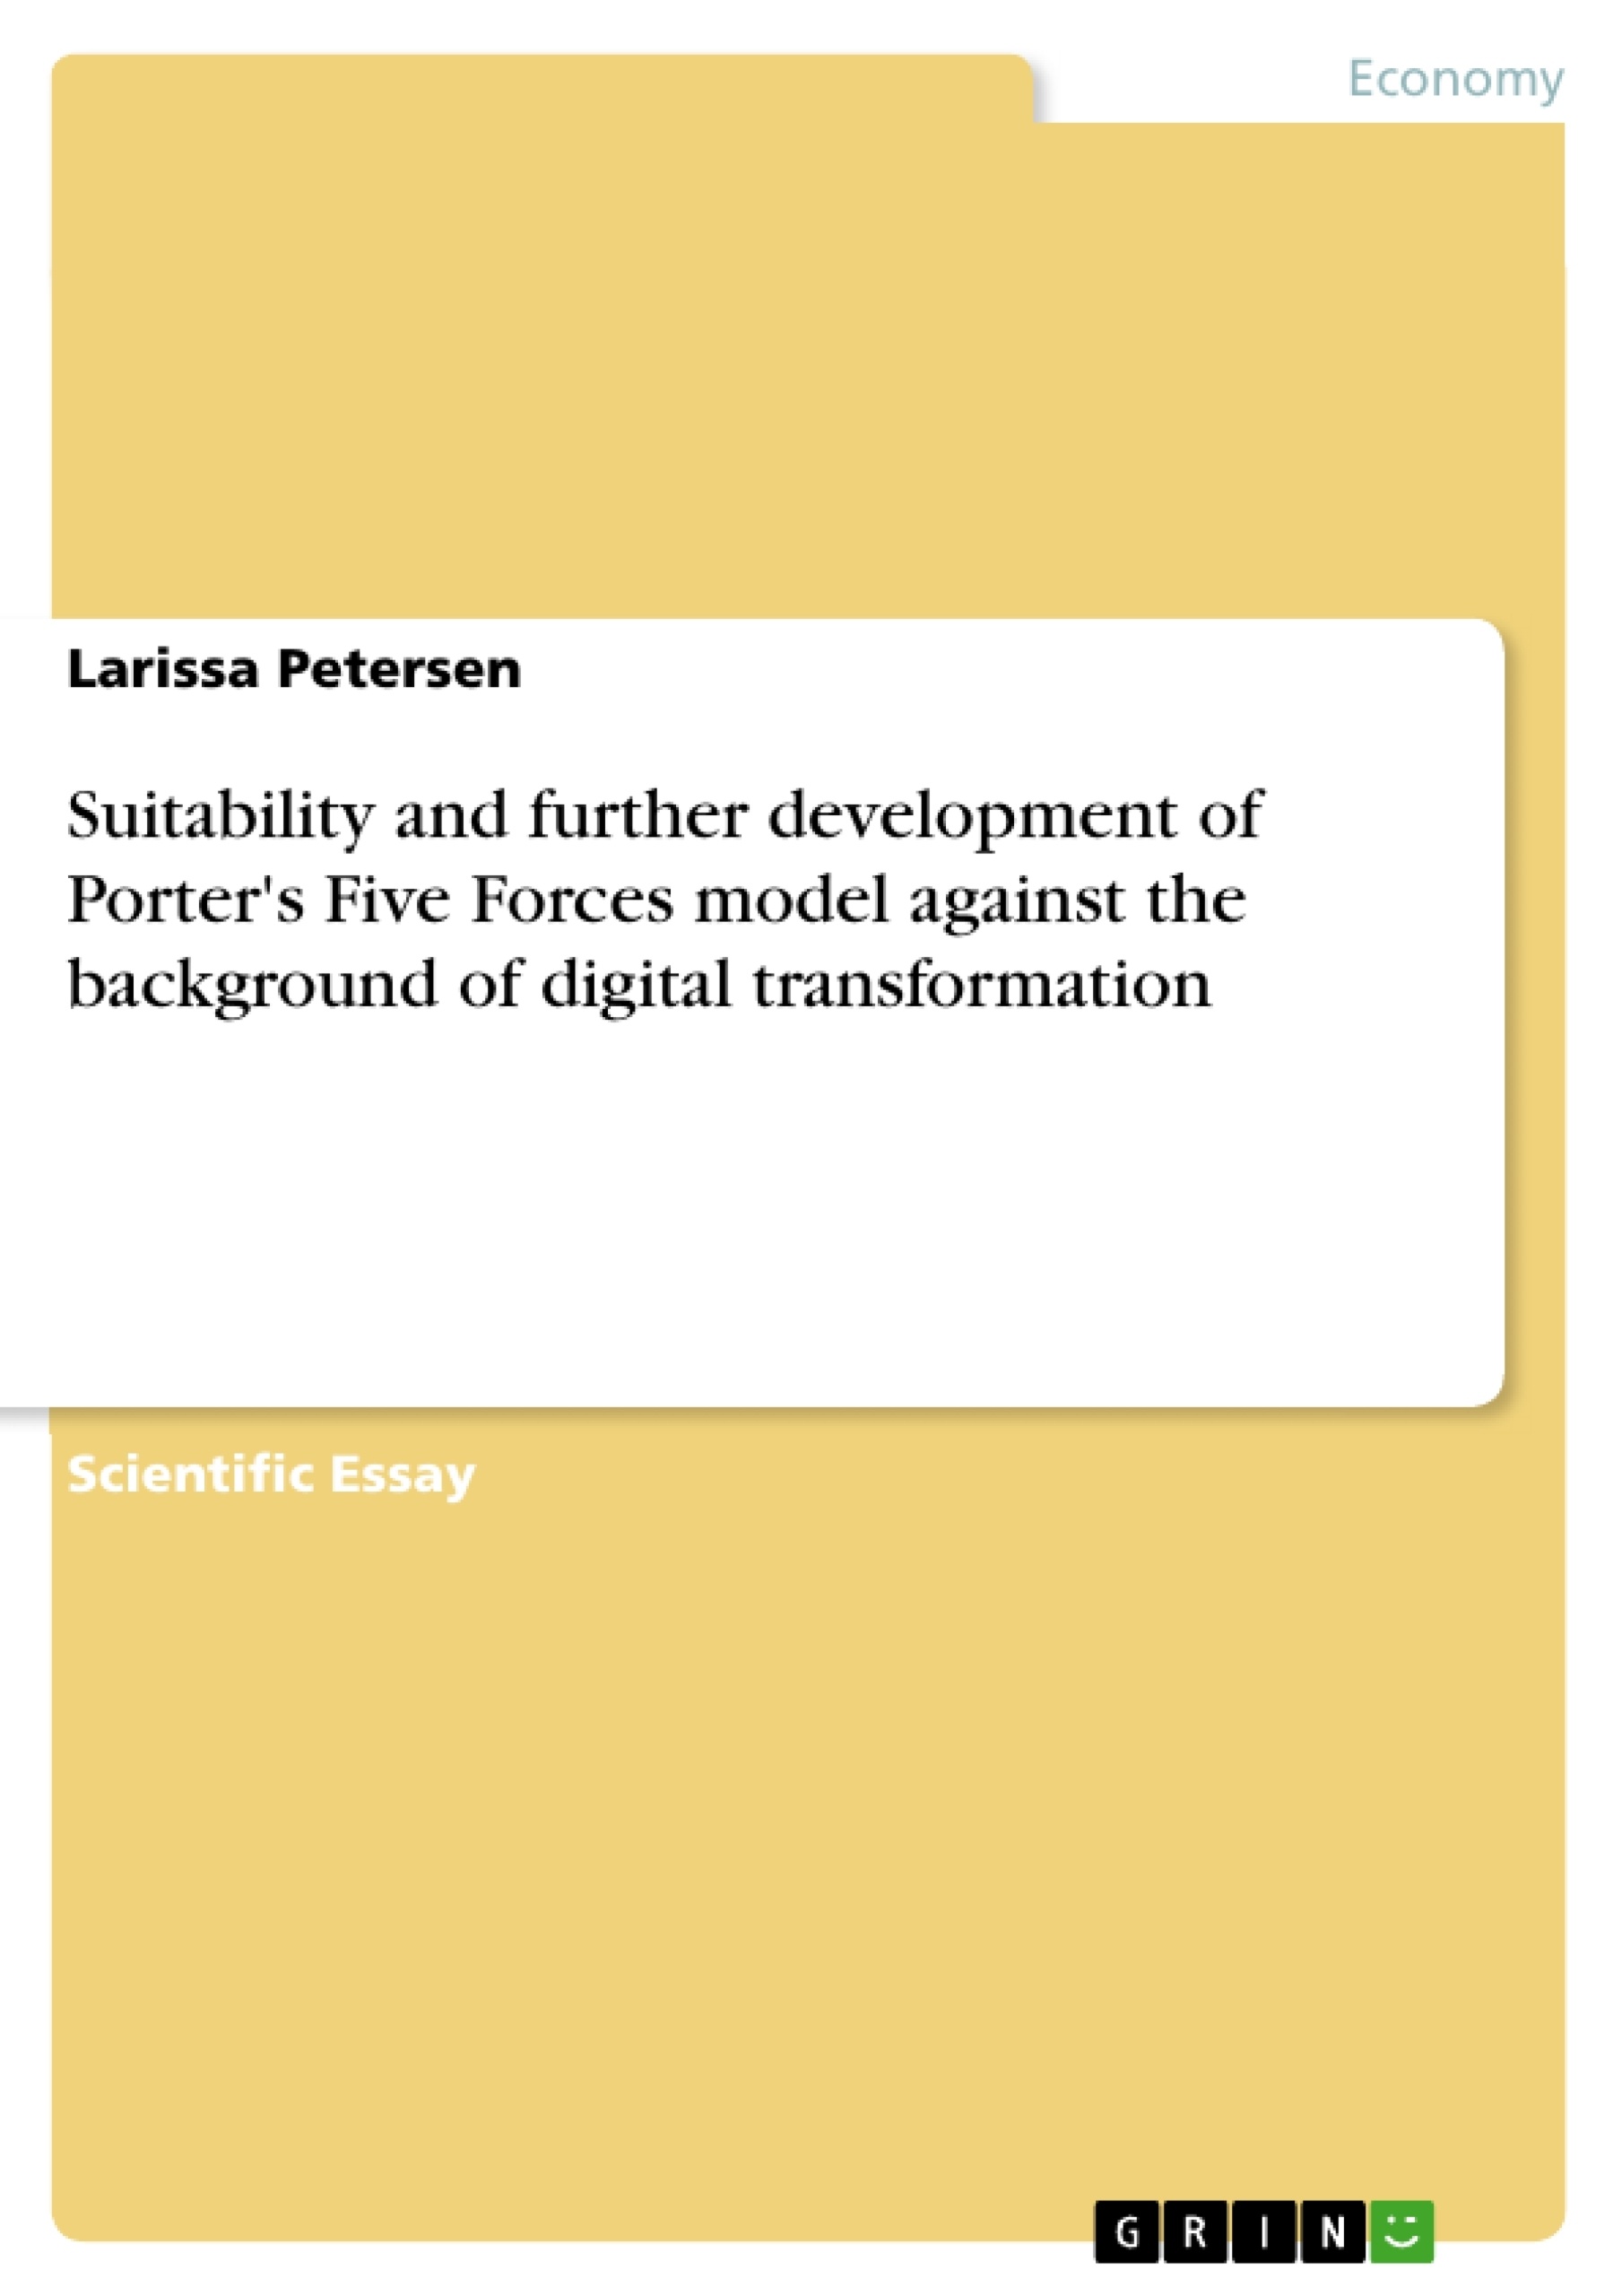 Titre: Suitability and further development of Porter's Five Forces model against the background of digital transformation